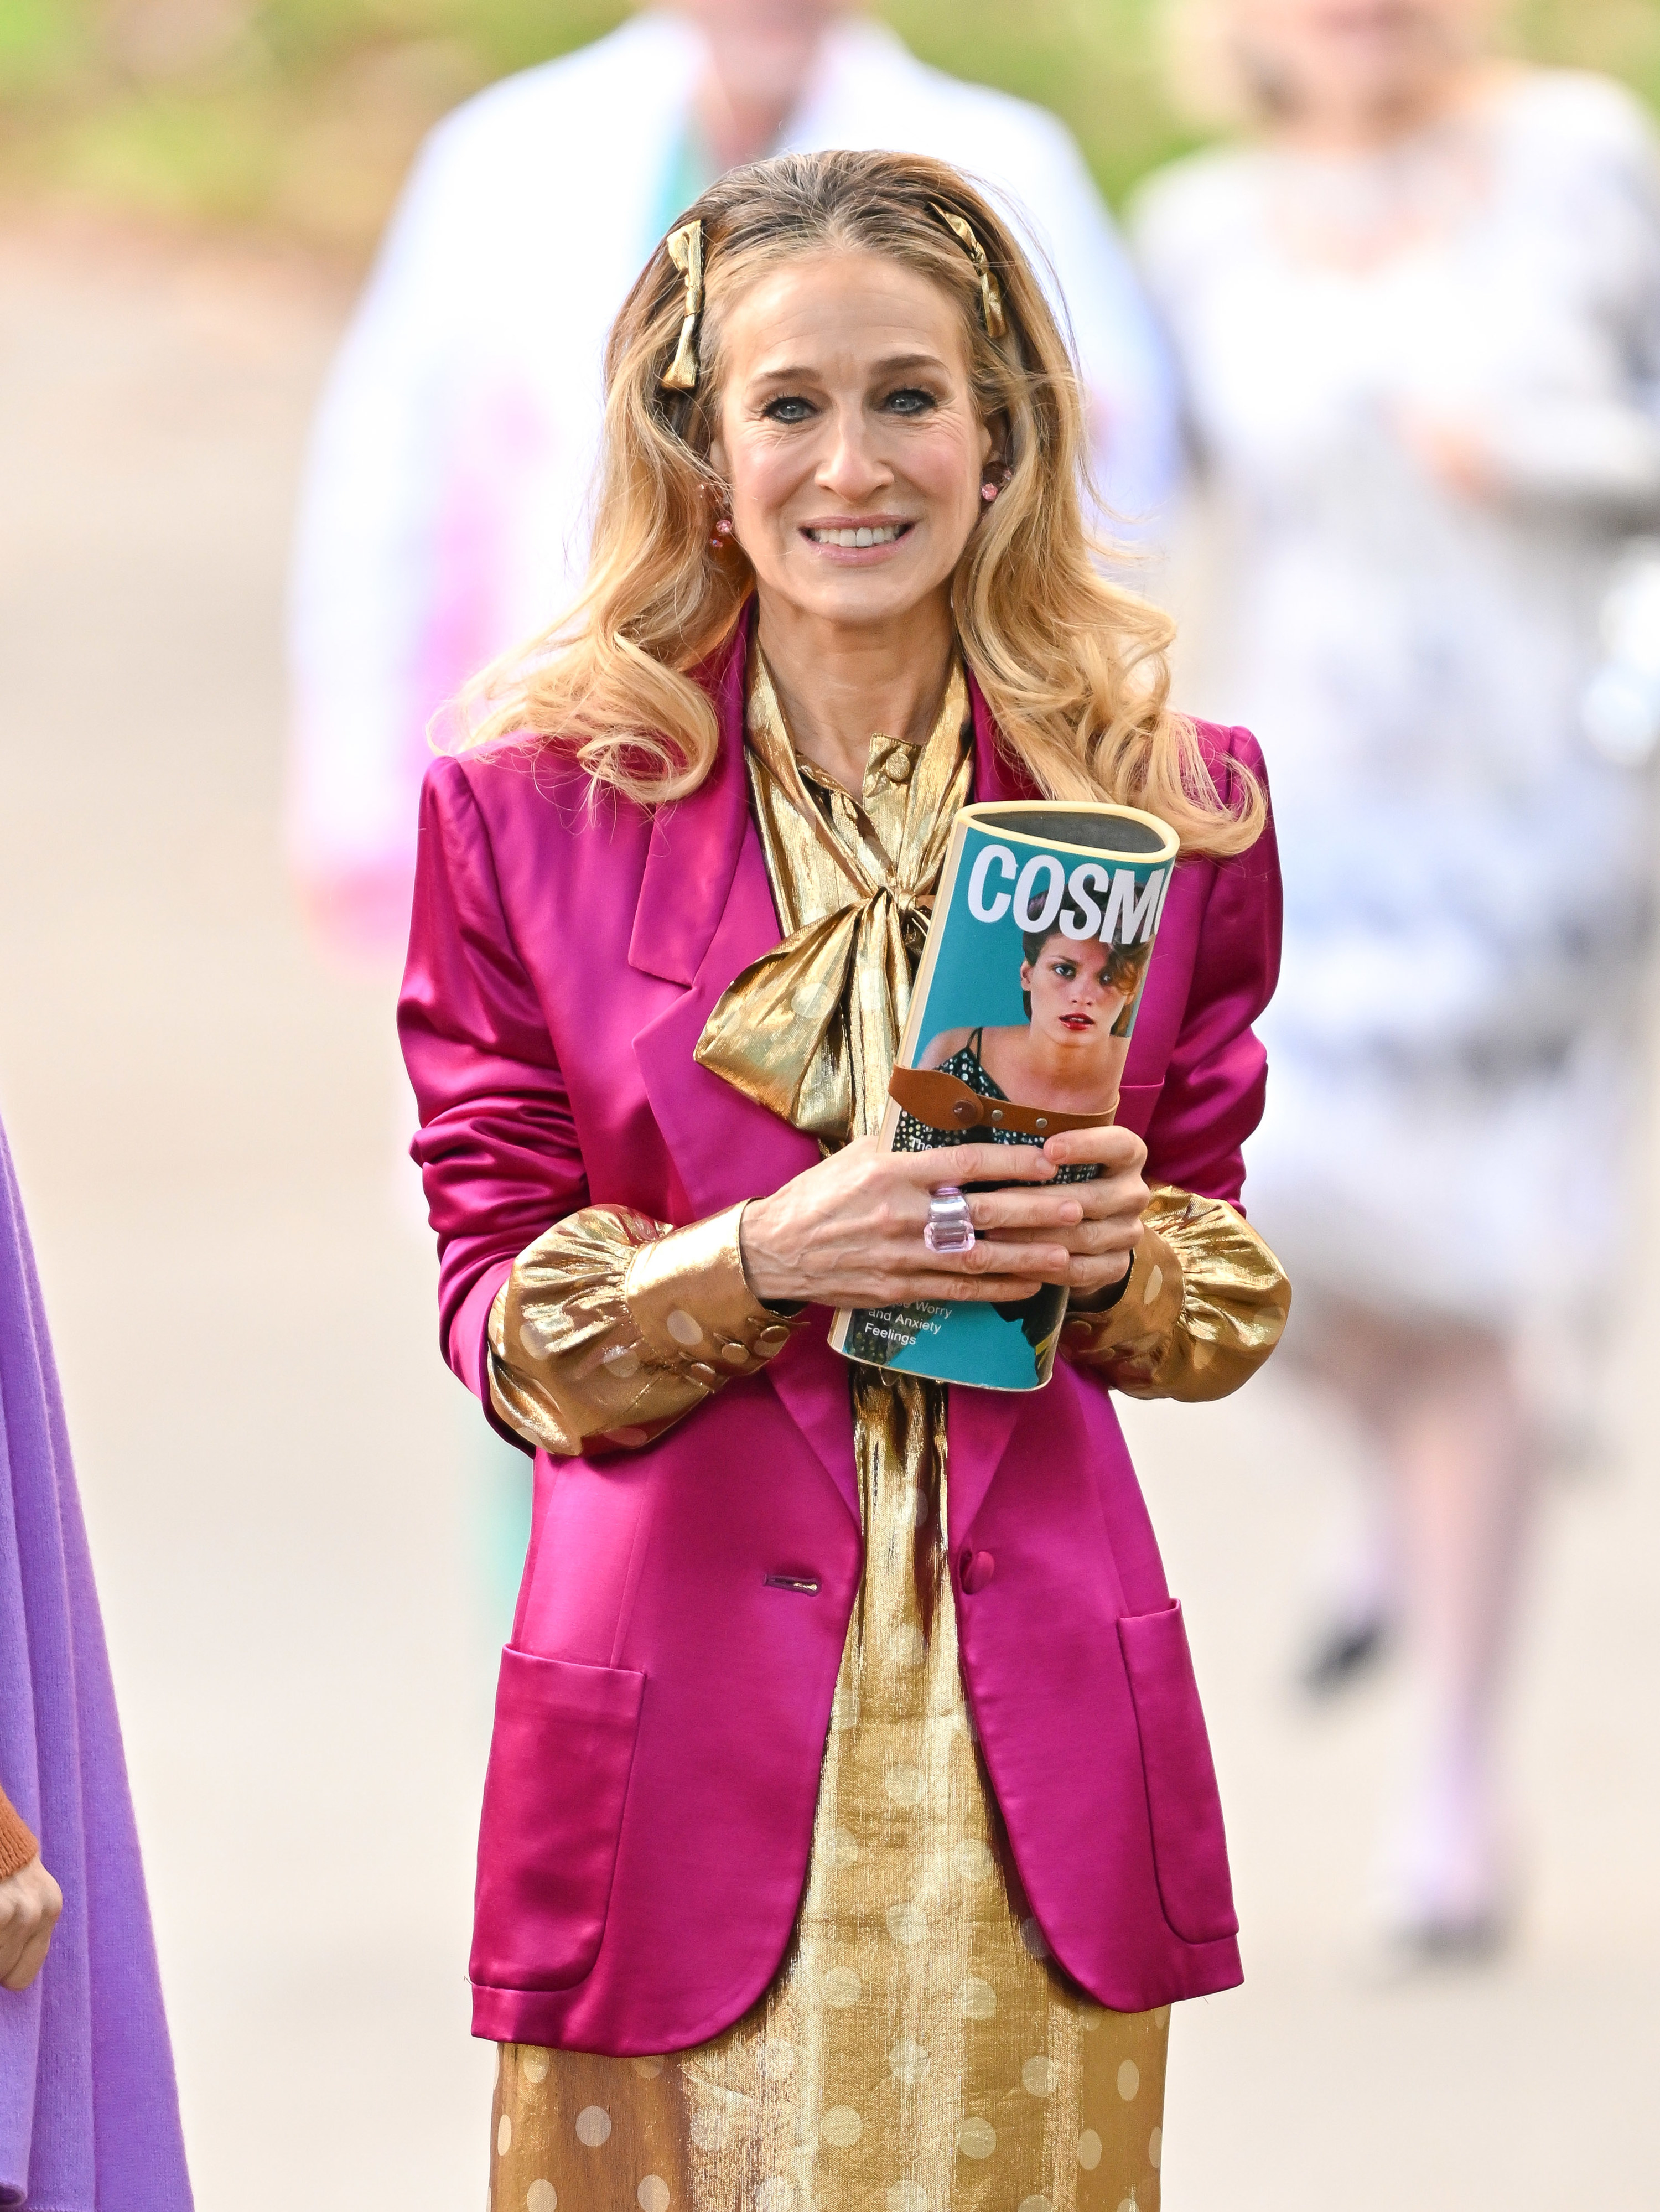 Sarah Jessica Parker on the set of &#x27;And Just Like That&#x27;, wearing a bright pink blazer and gold dress - her chin mole isn&#x27;t visible